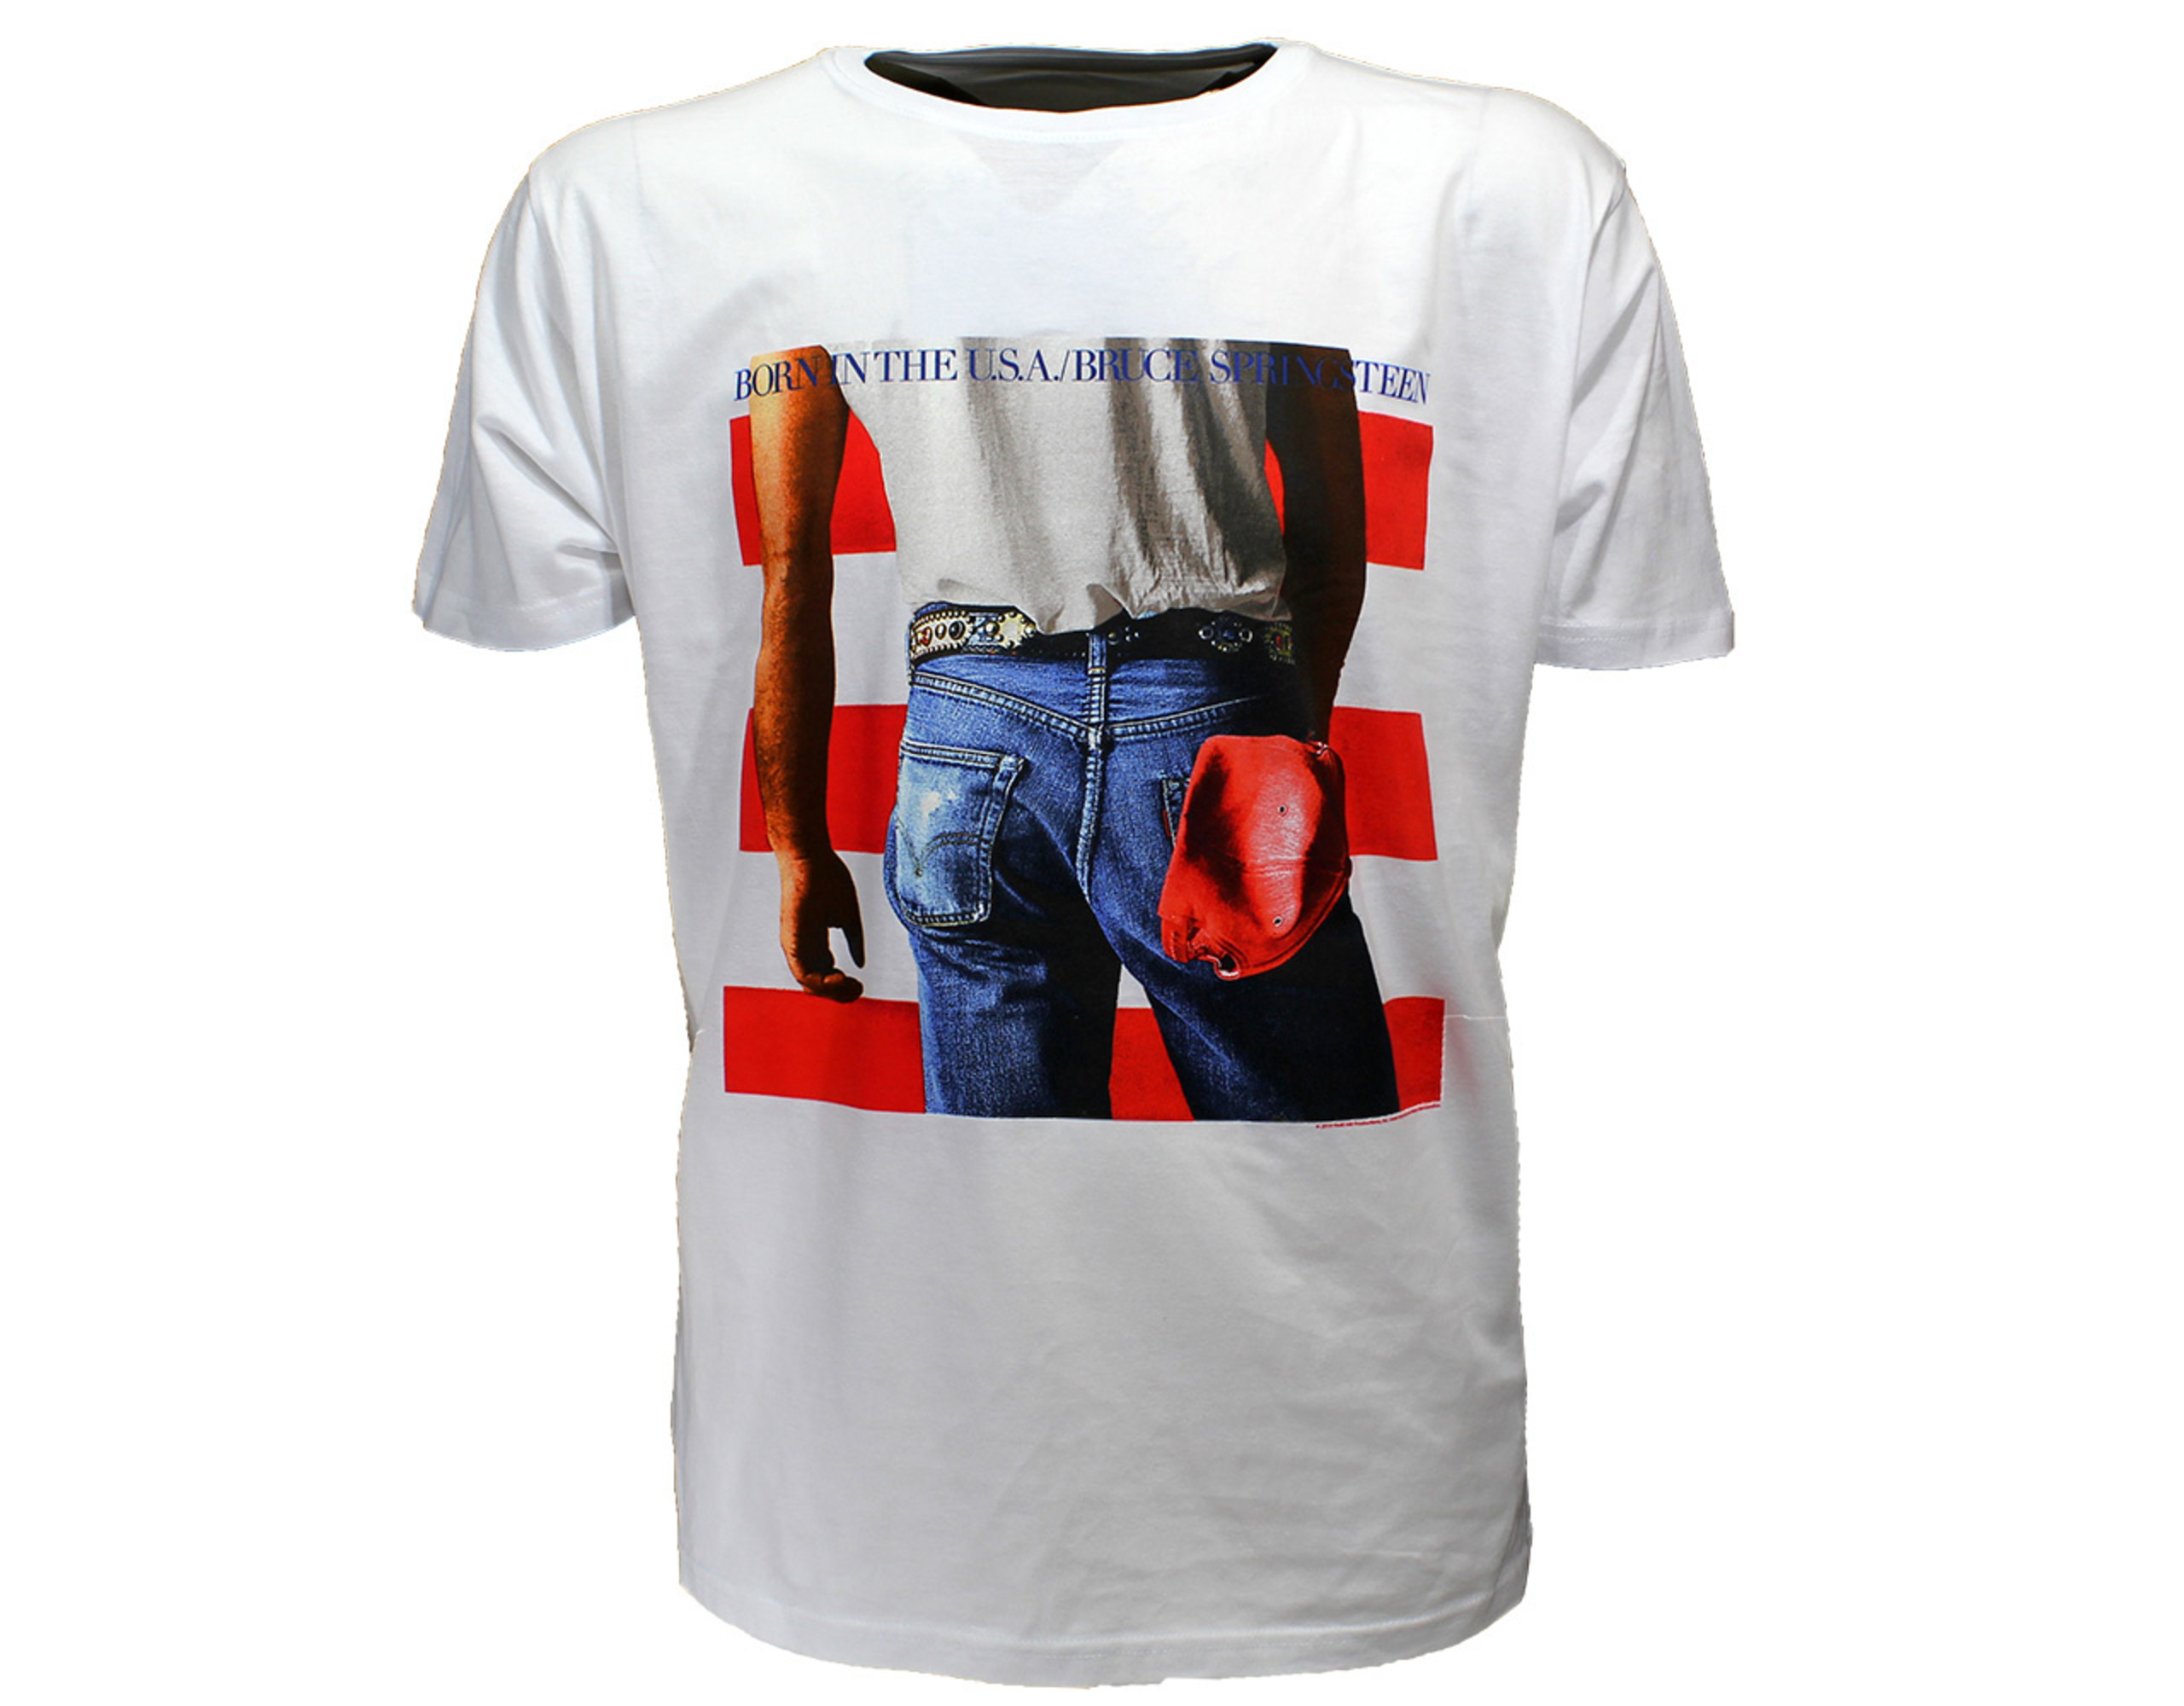 bruce springsteen born in the usa tour t shirt